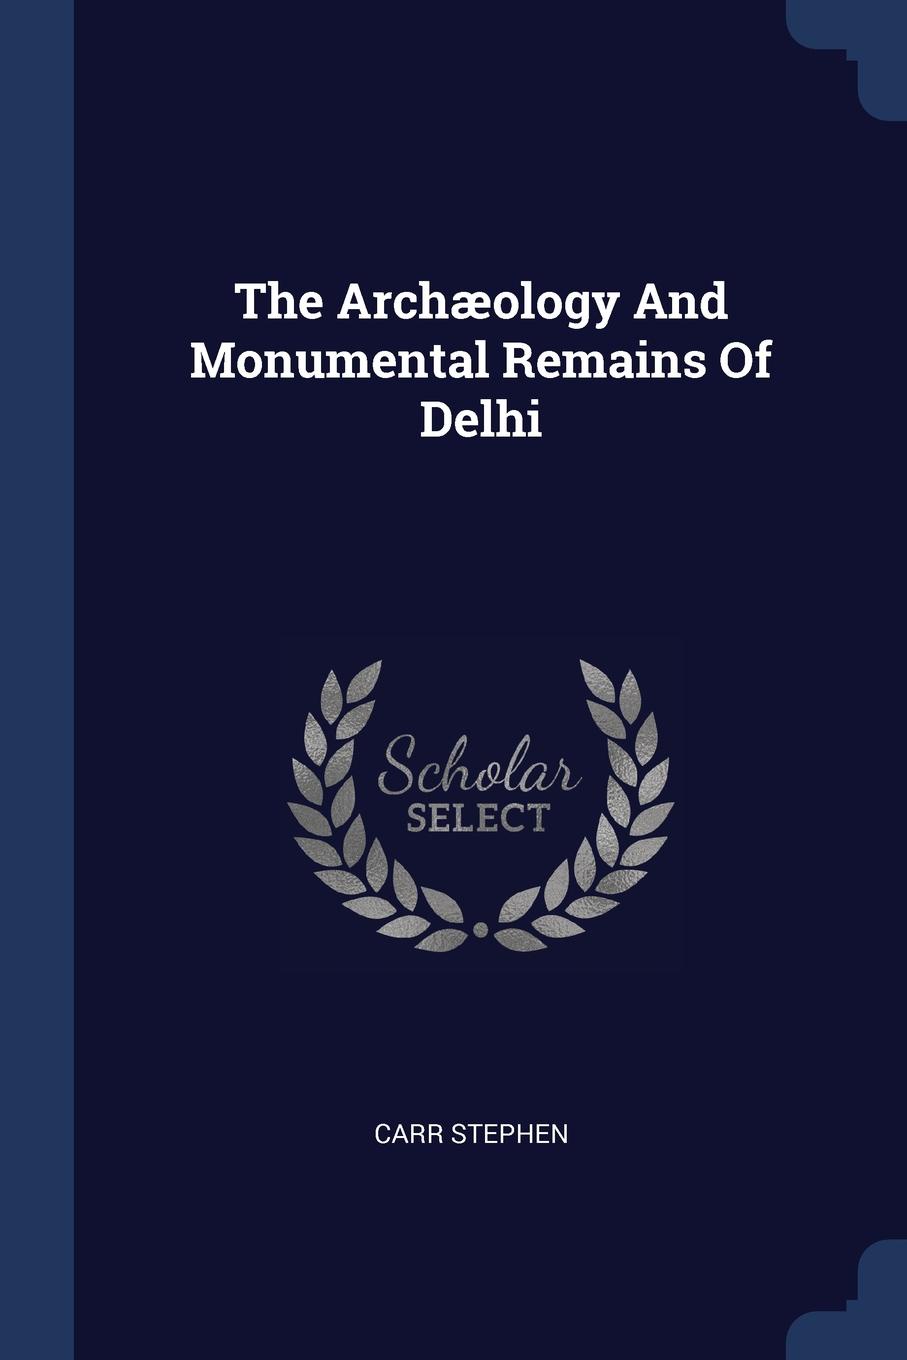 The Archaeology And Monumental Remains Of Delhi